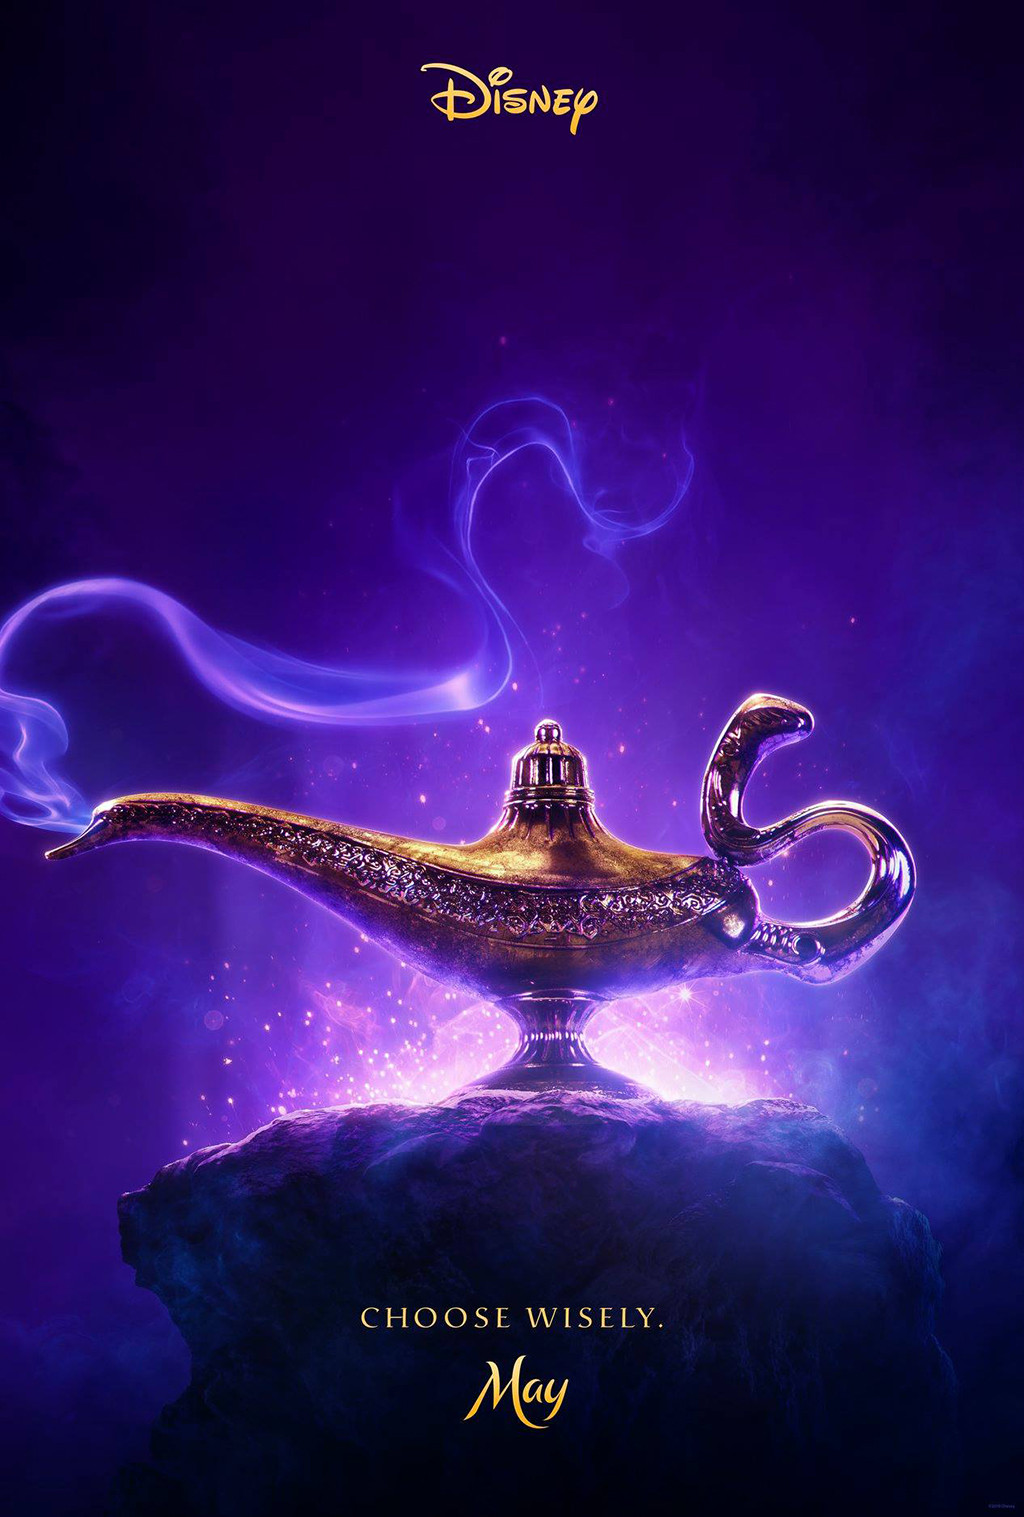 Will Smith Makes His Very Blue Debut in Aladdin Trailer